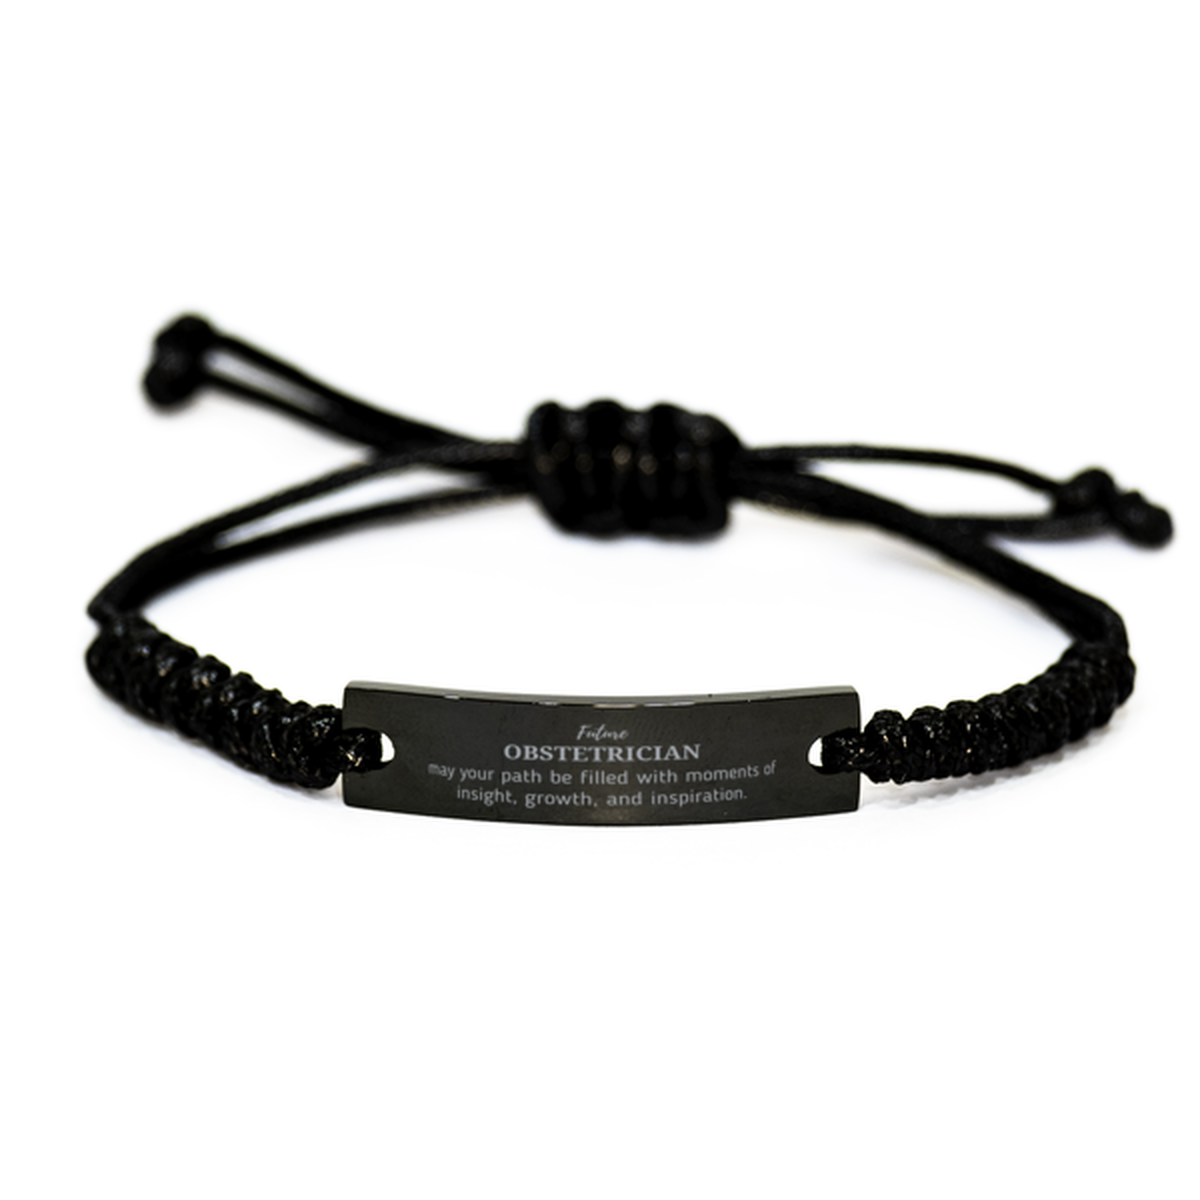 Future Obstetrician Gifts, May your path be filled with moments of insight, Graduation Gifts for New Obstetrician, Christmas Unique Black Rope Bracelet For Men, Women, Friends